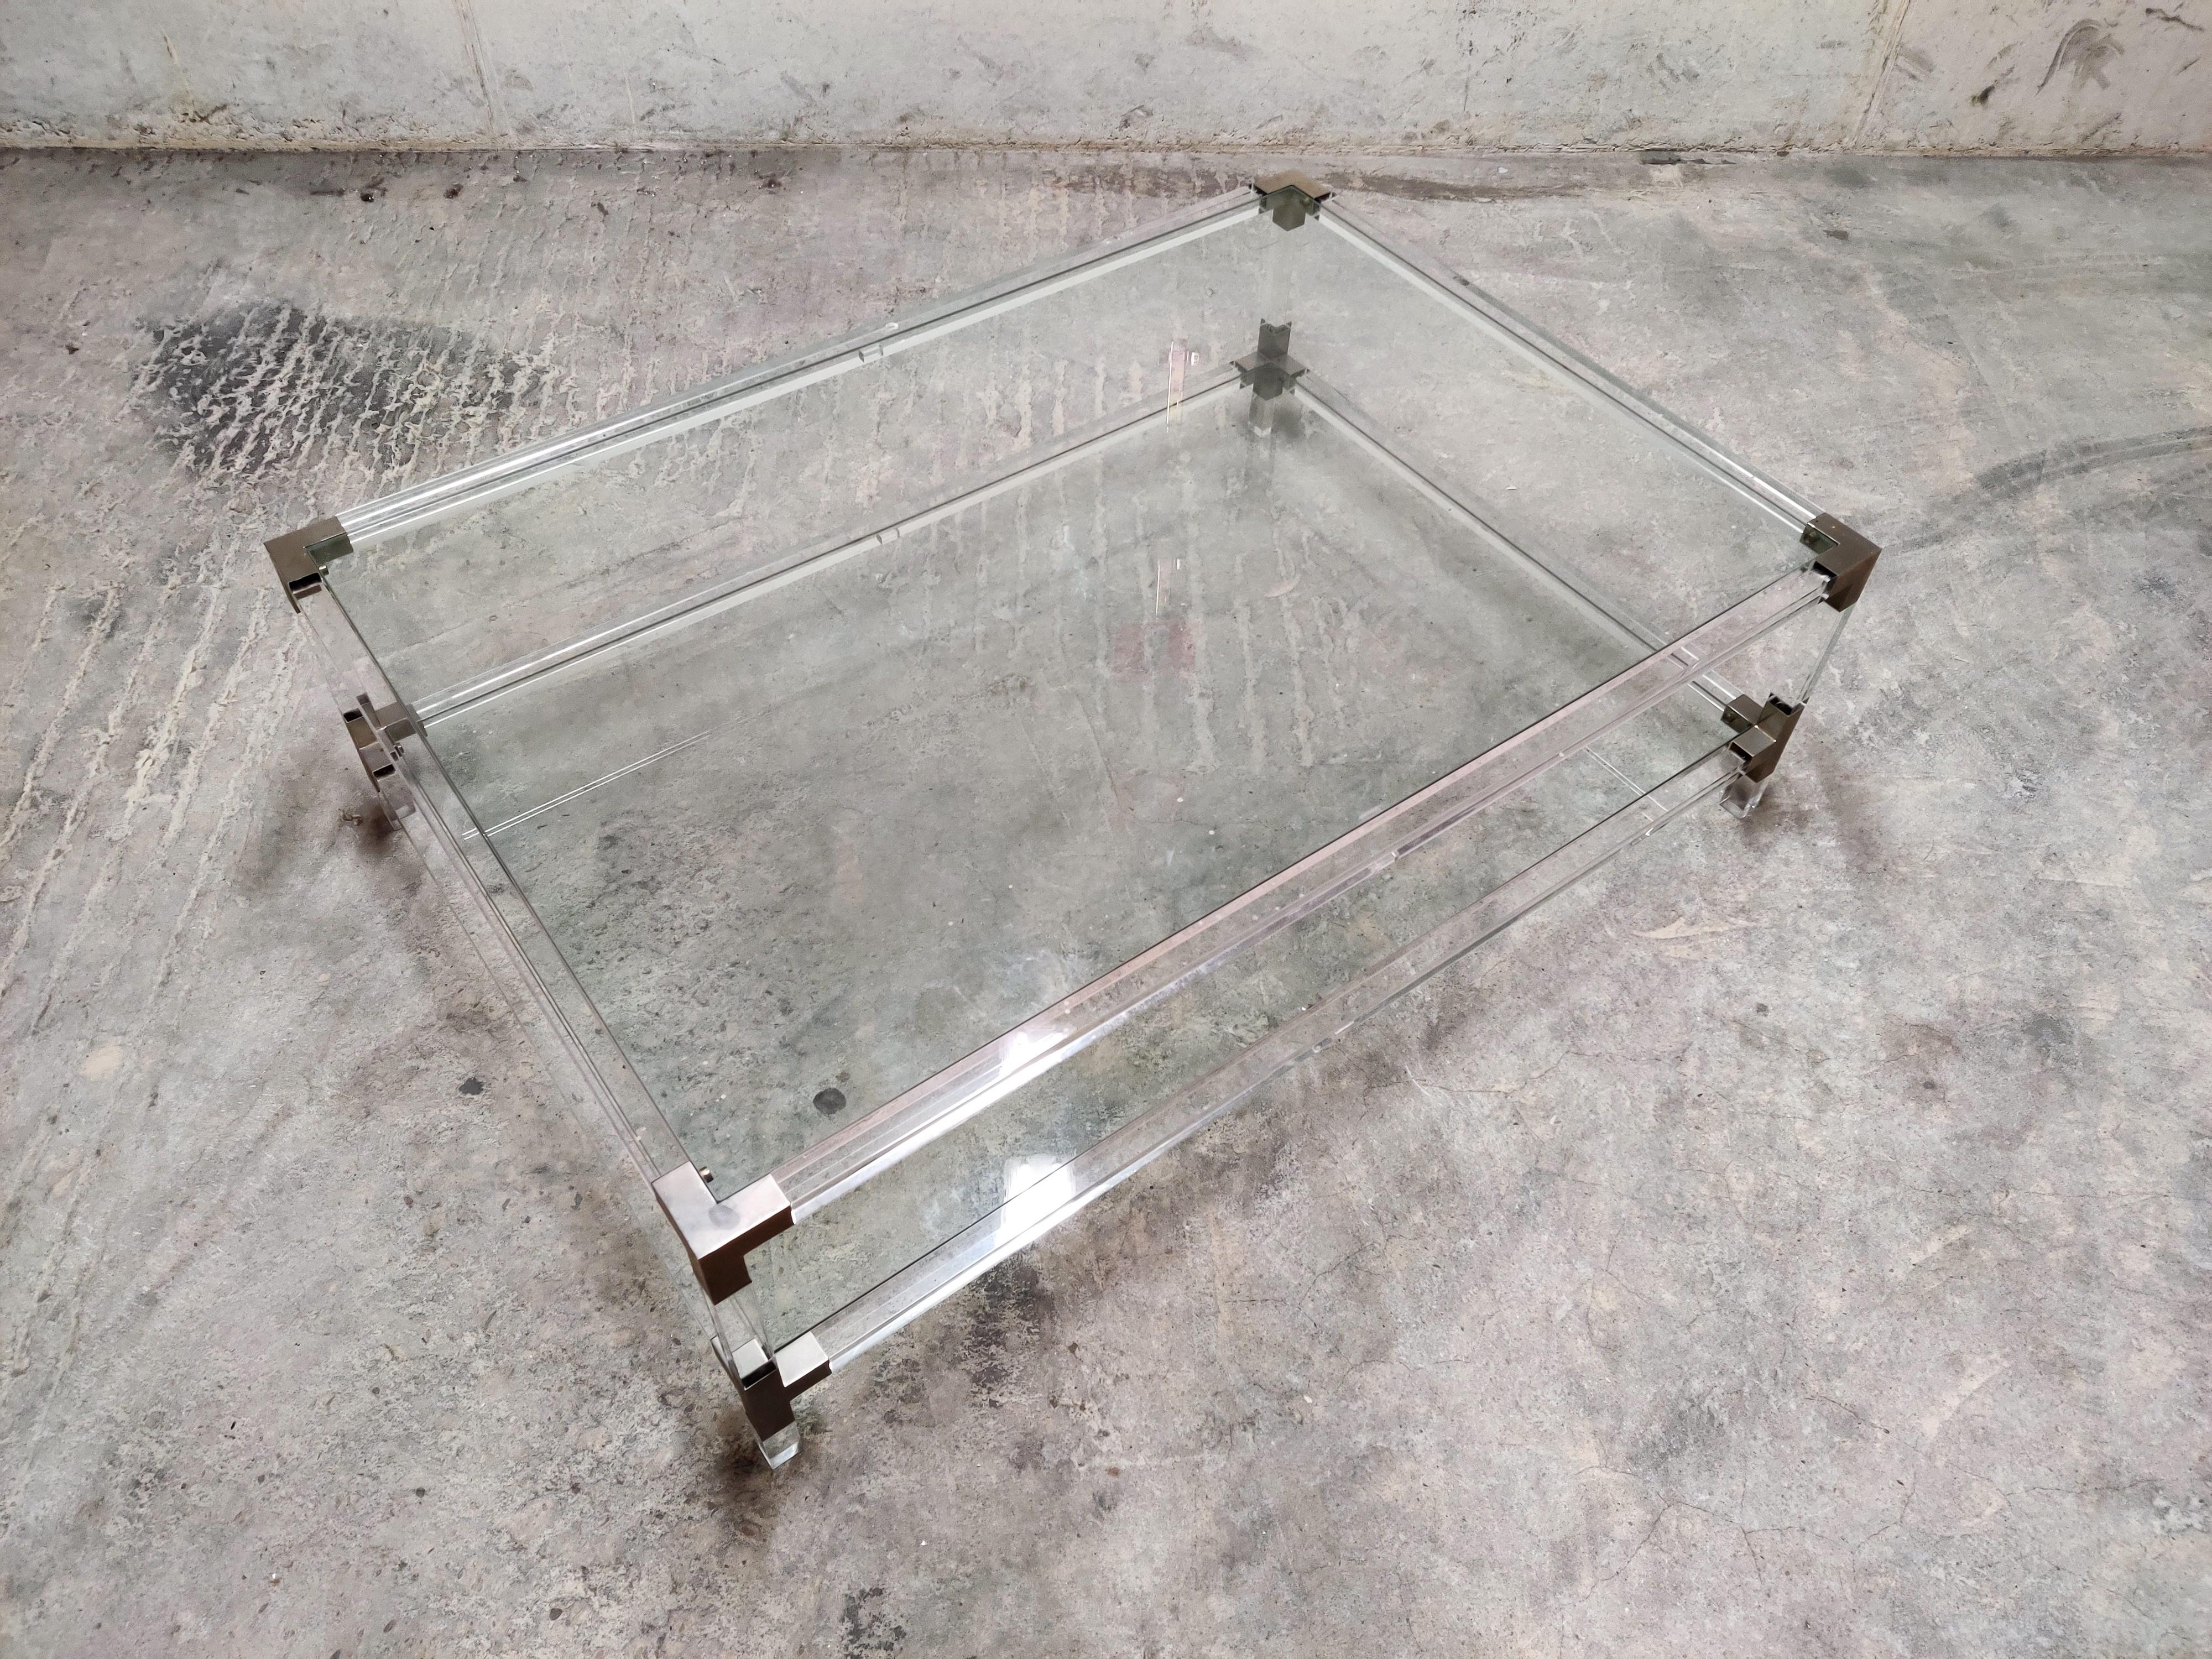 Rectangular coffee table with a Lucite frame, chrome/metal corners and clear glass plates.

Good condition.

Very modern looking and decorative table that can be combined with lots of interior styles.

Patina on the brass.

Good